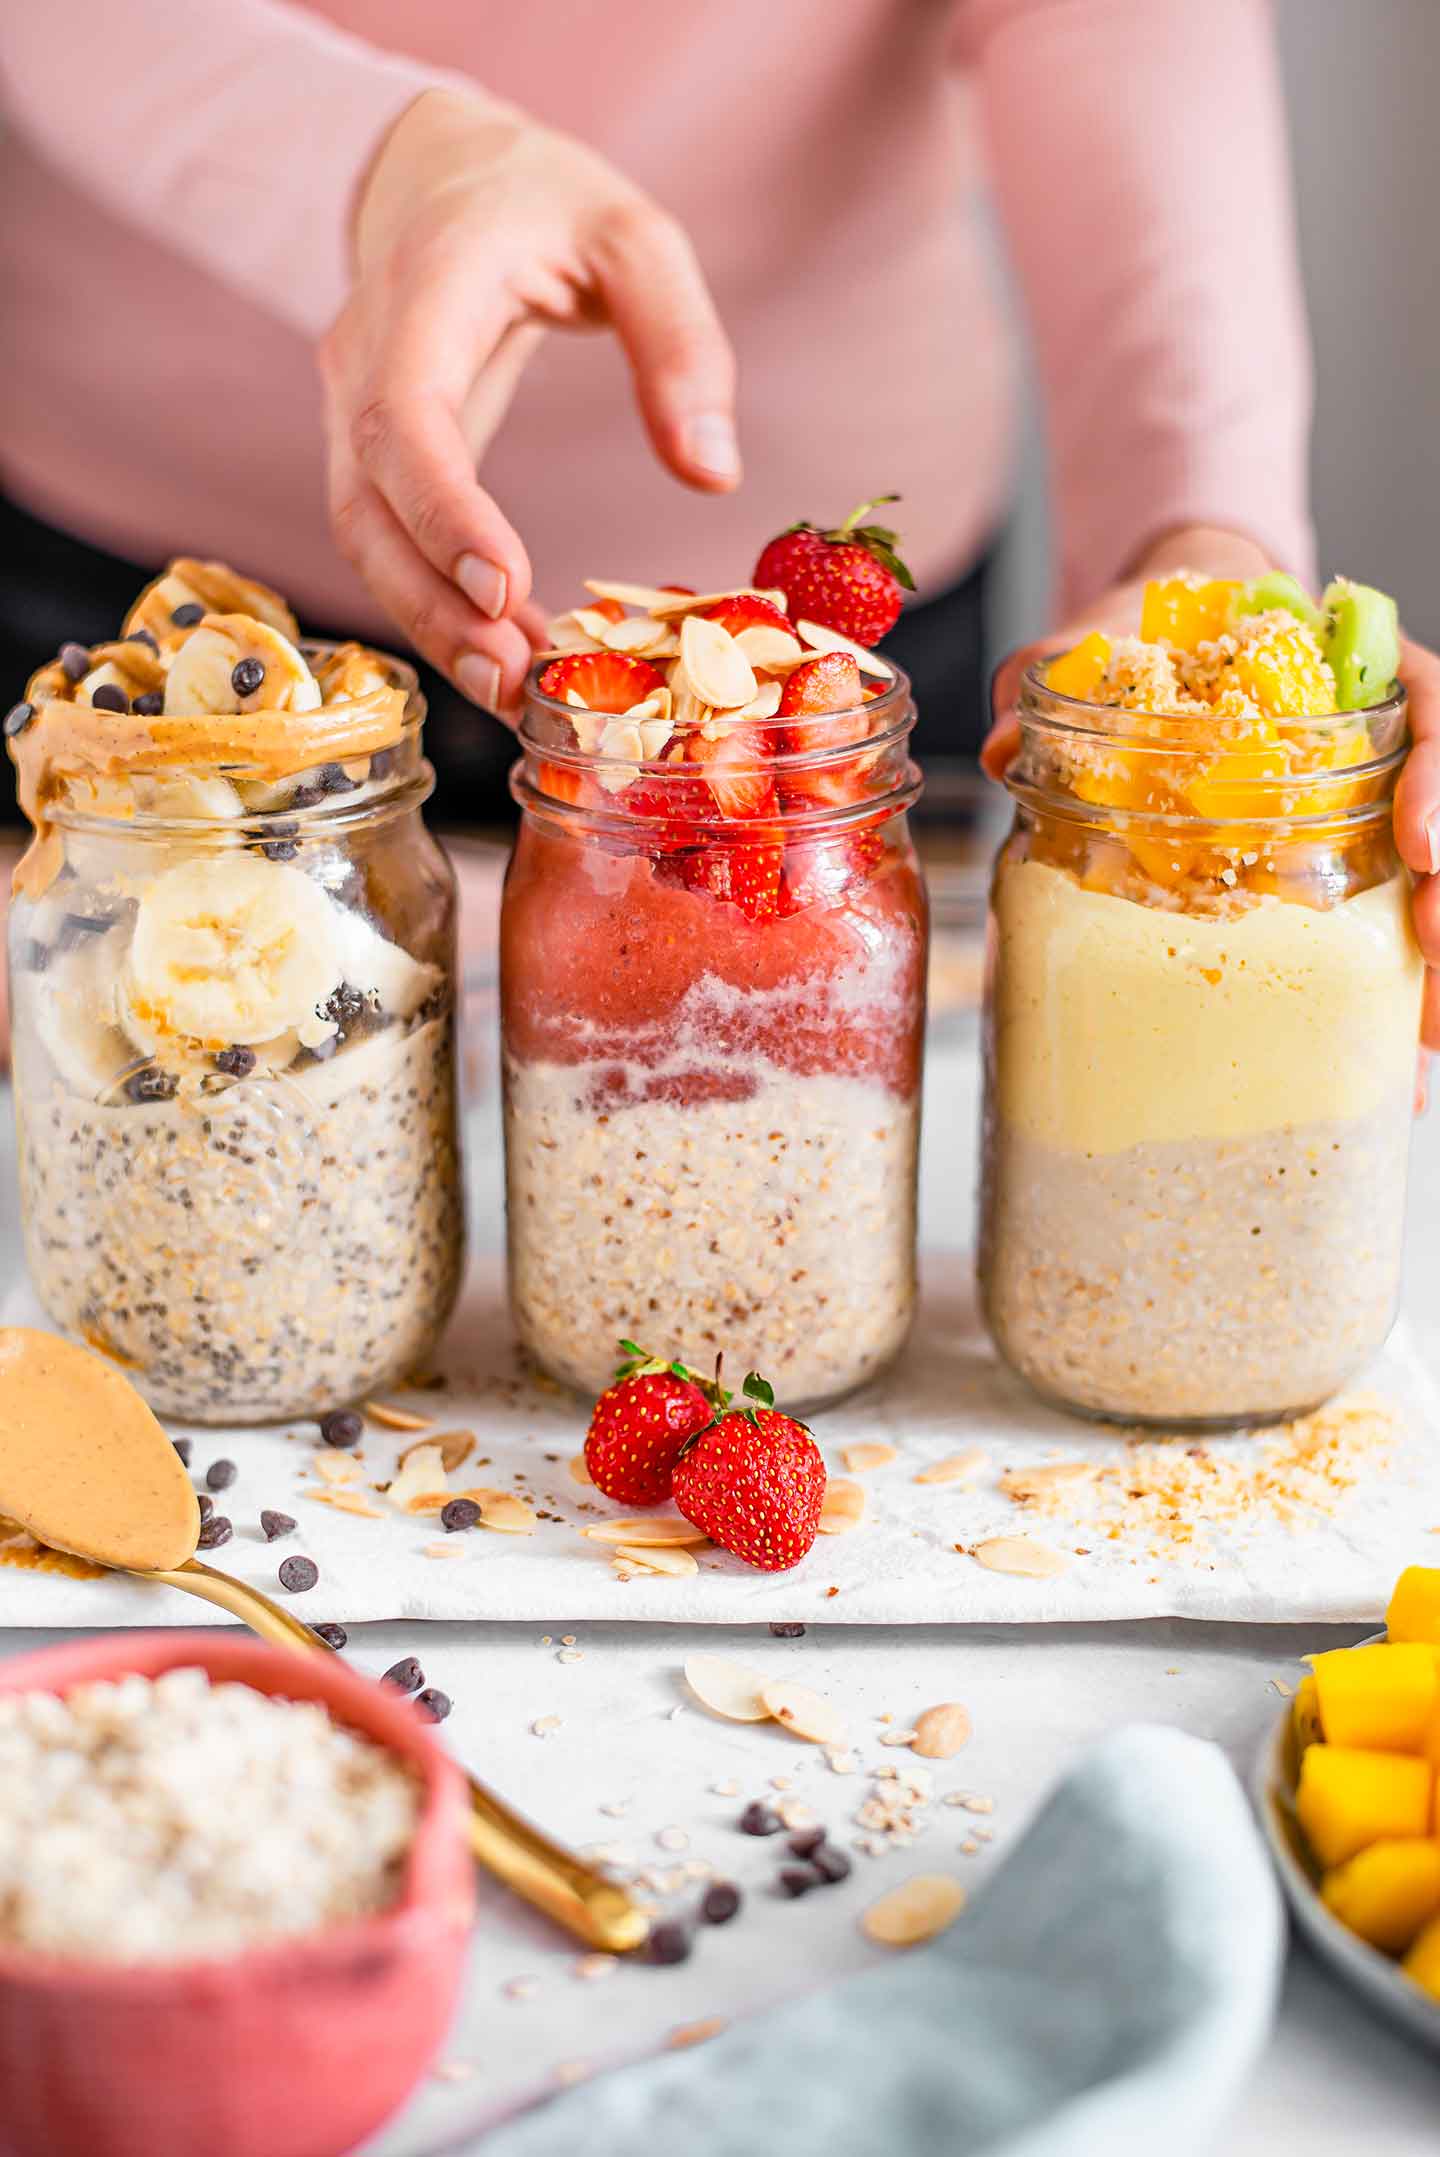 https://tastythriftytimely.com/wp-content/uploads/2021/06/How-To-Make-Overnight-Oats-A-Tasty-Guide-4.jpg